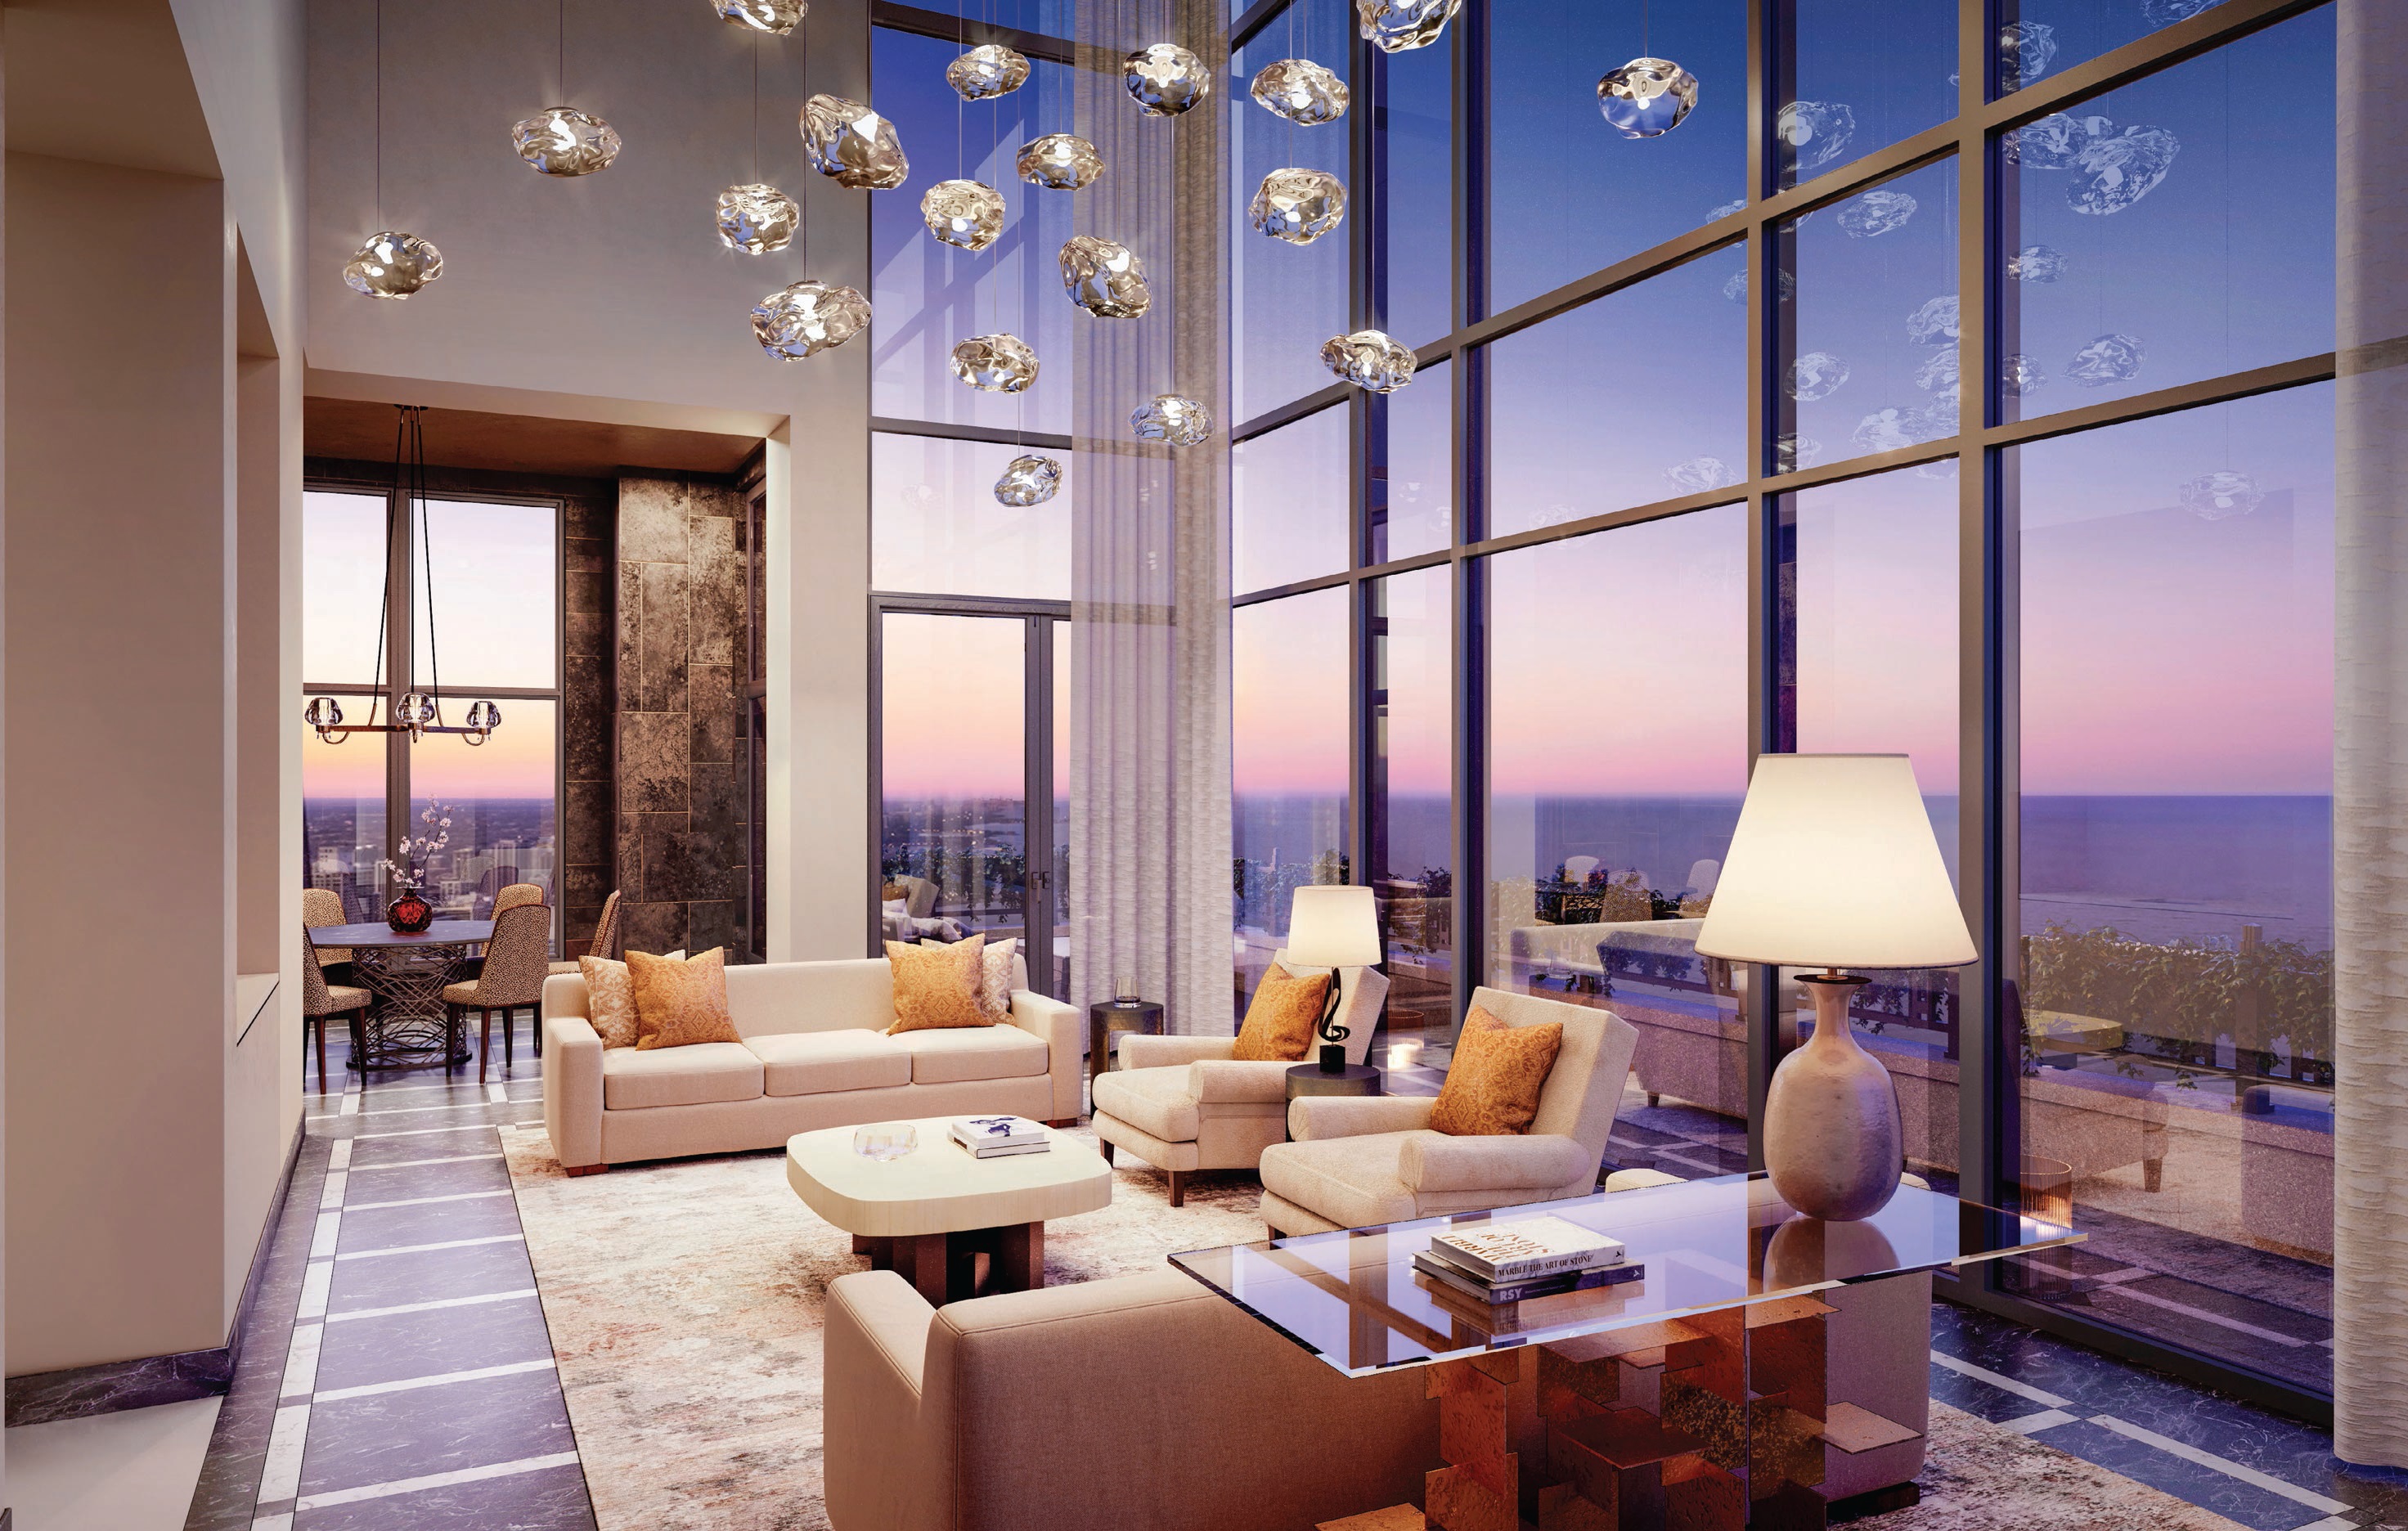 RENDERING COURTESY OF JAMESON SOTHEBY’S INTERNATIONAL REALTY/CITYSCAPE AND INTERIORS BY ROBERT A.M. STERN ARCHITECTS